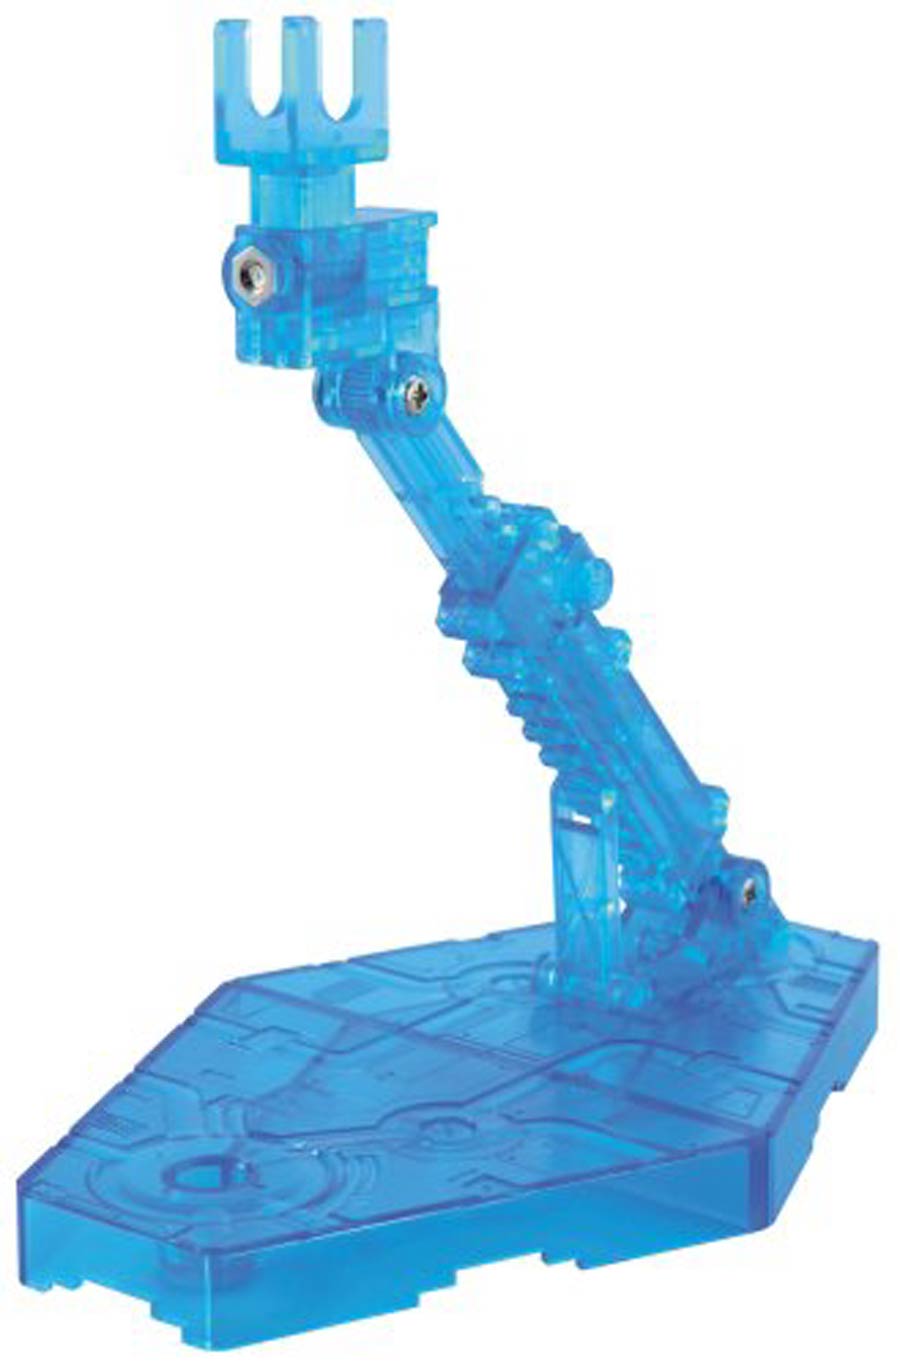 Gundam Display Stand - Action Base 2 For 1/144 Kits - Clear Blue